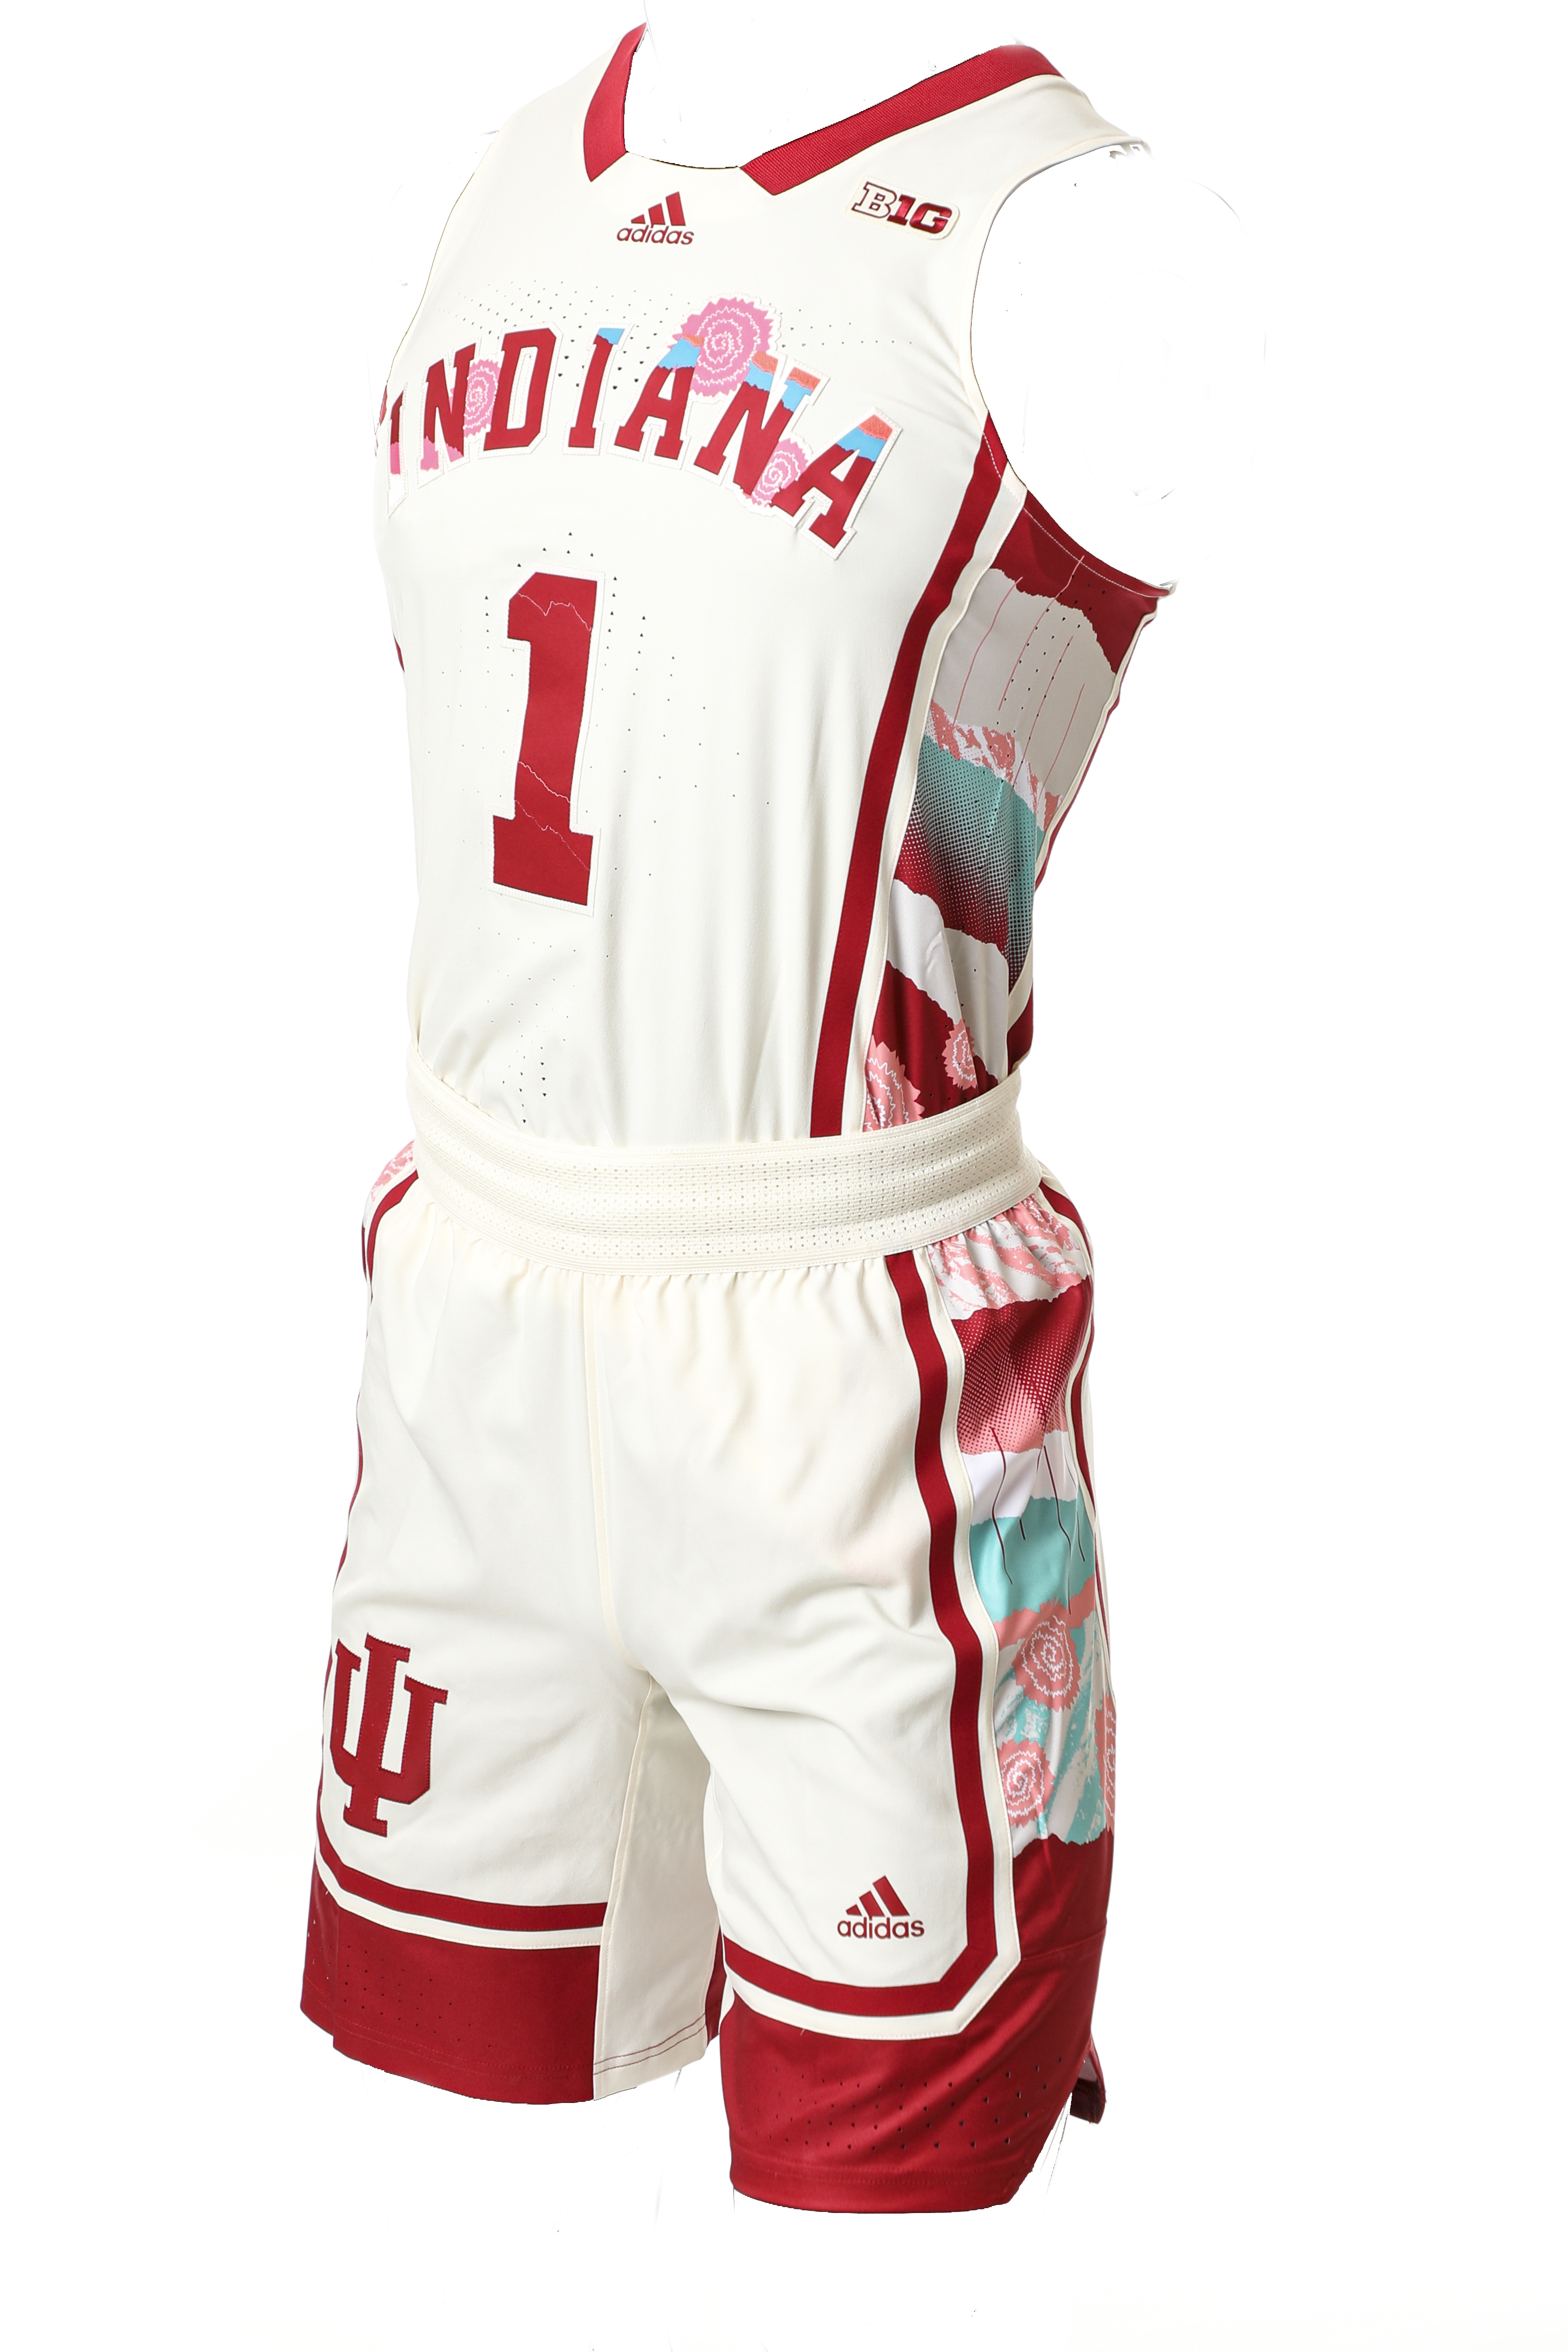 Indiana is wearing alternate uniforms for the game with Maryland on Thursday night to honor Black History Month. (Photo provided by IU Athletics)